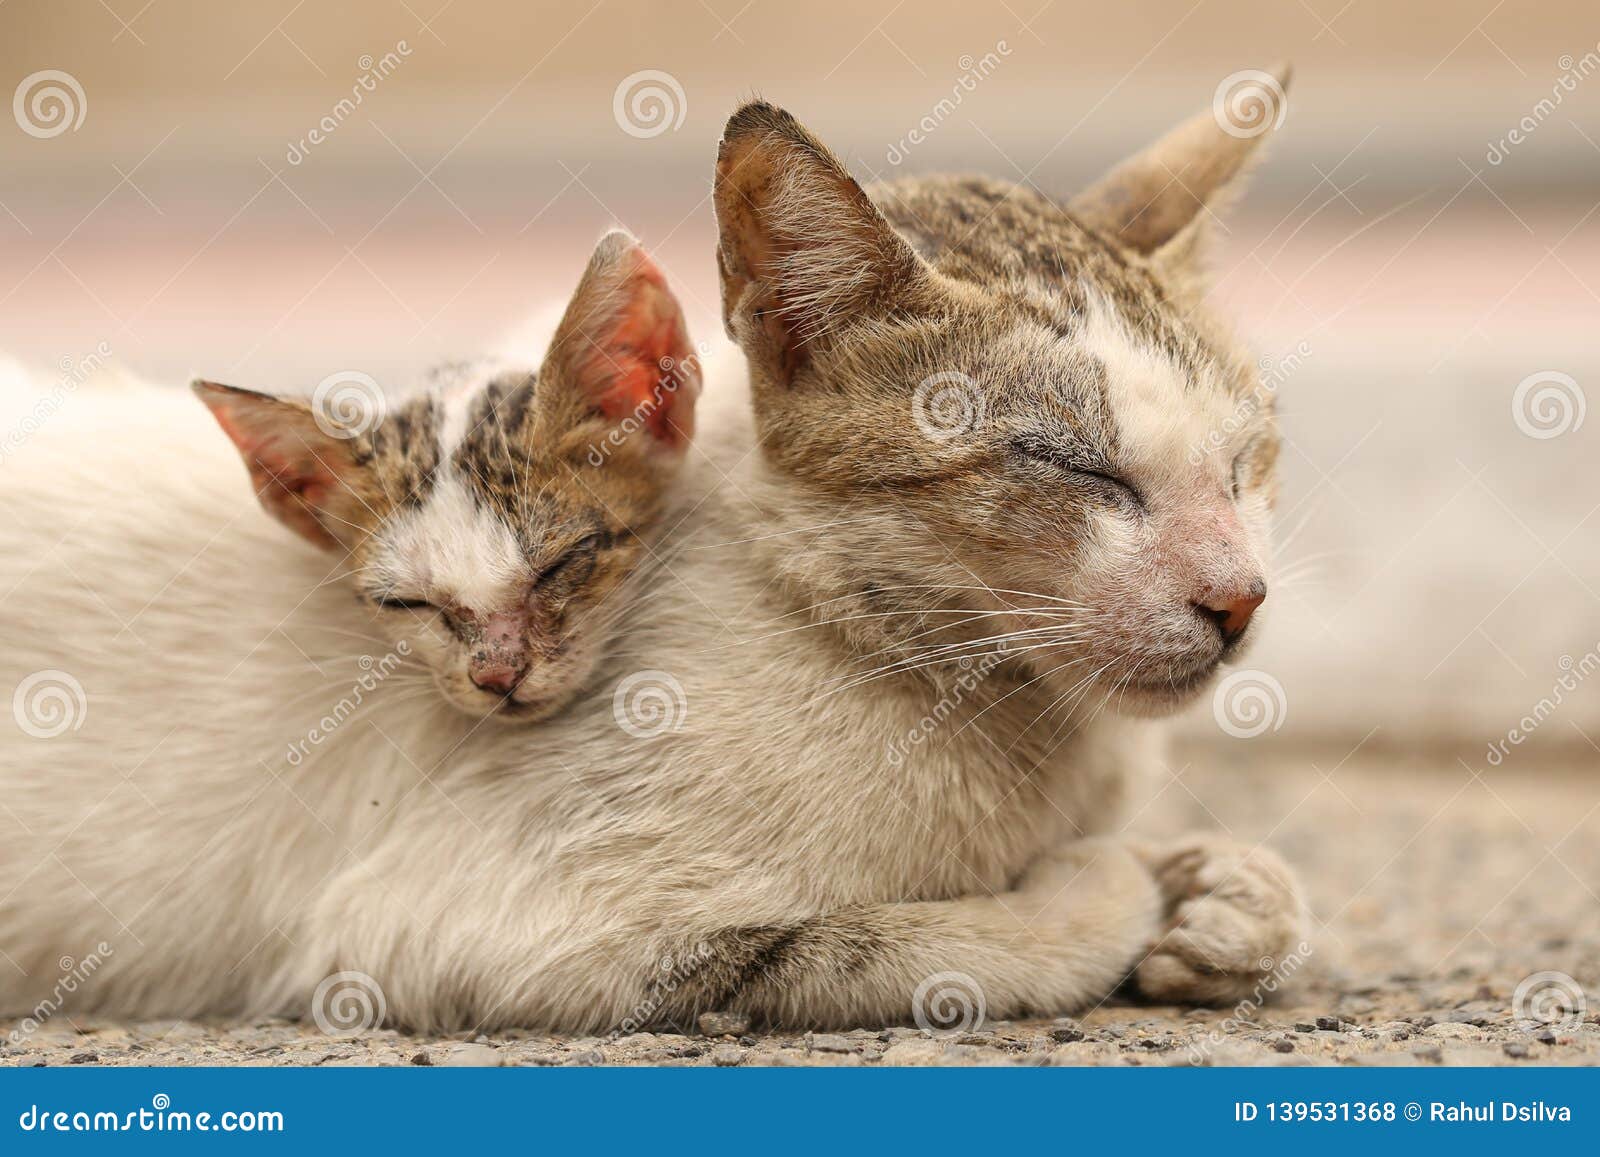 Vagrant Sick Cats. Homeless Wild Cats On Dirty Street In Asia Stock